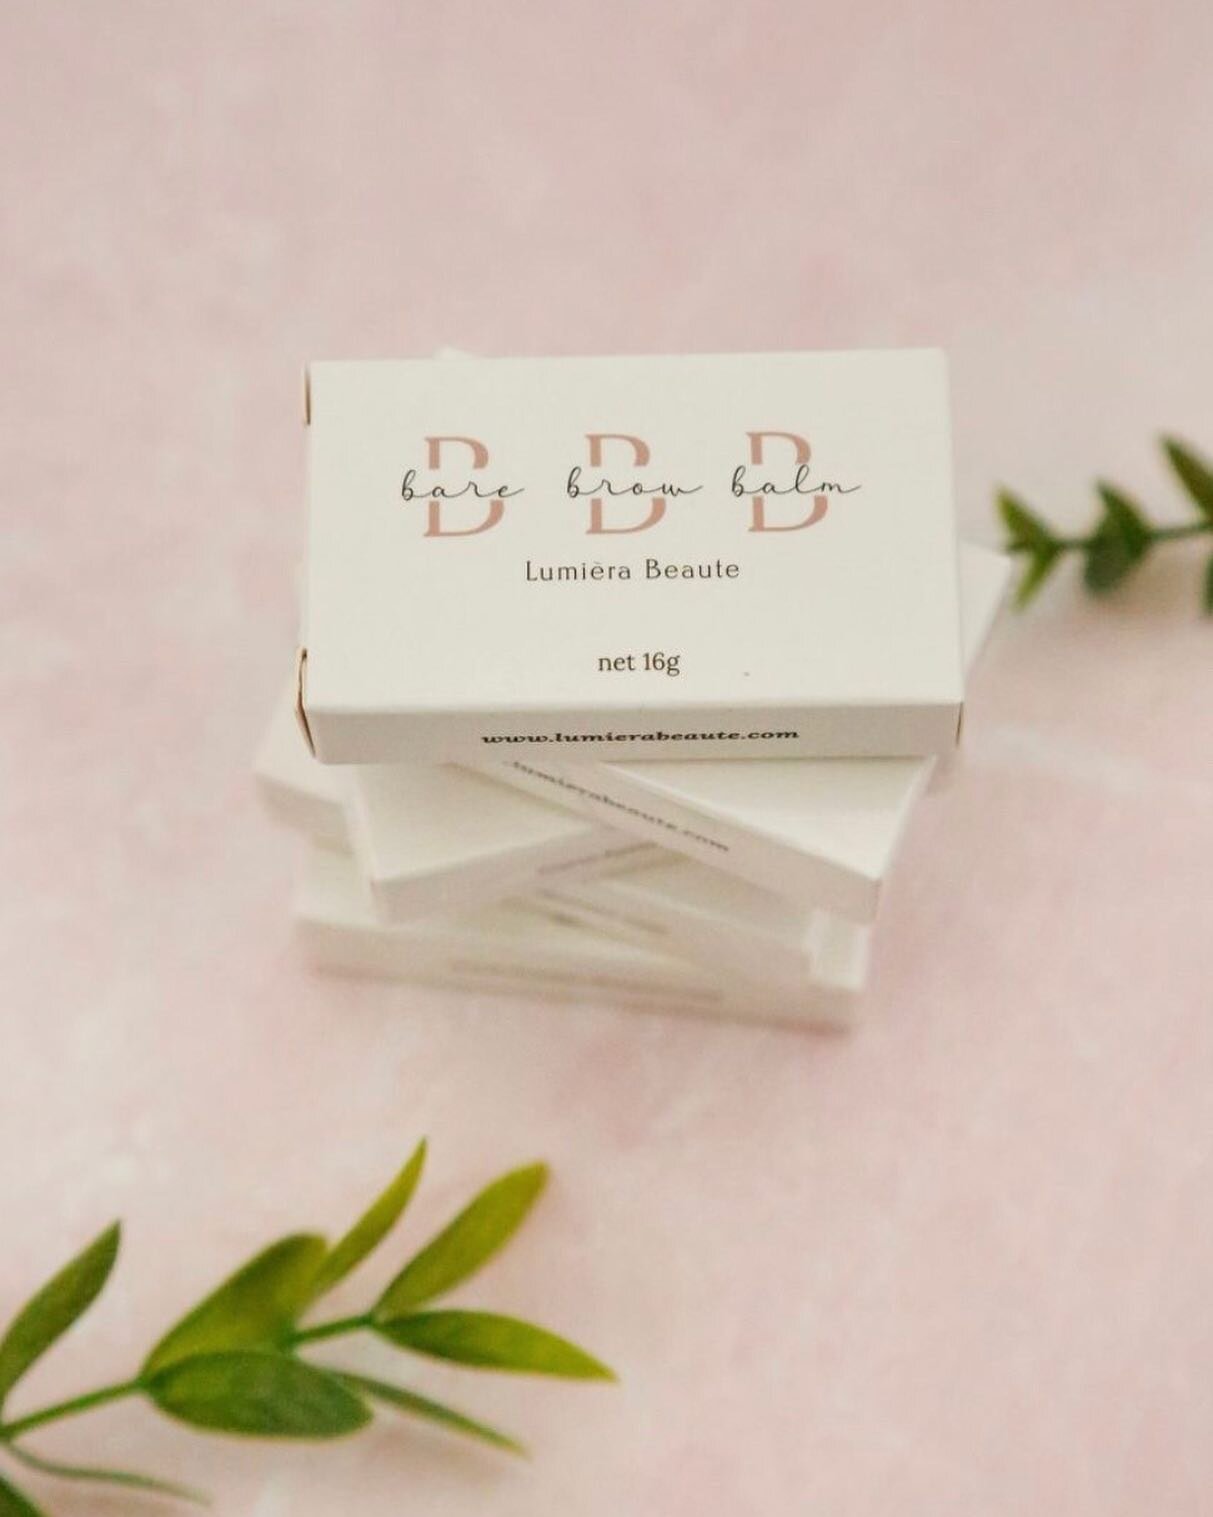 Level up your #browgame!⁠
⁠
Our Bare Brow Balm tames and strengthens your brows with this nourishing packed formula.  BBB non-sticky gel works to freeze those thick and unruly hairs in place. Packed with Vitamin E, Jojoba Oil, Coconut Oil and Grape S